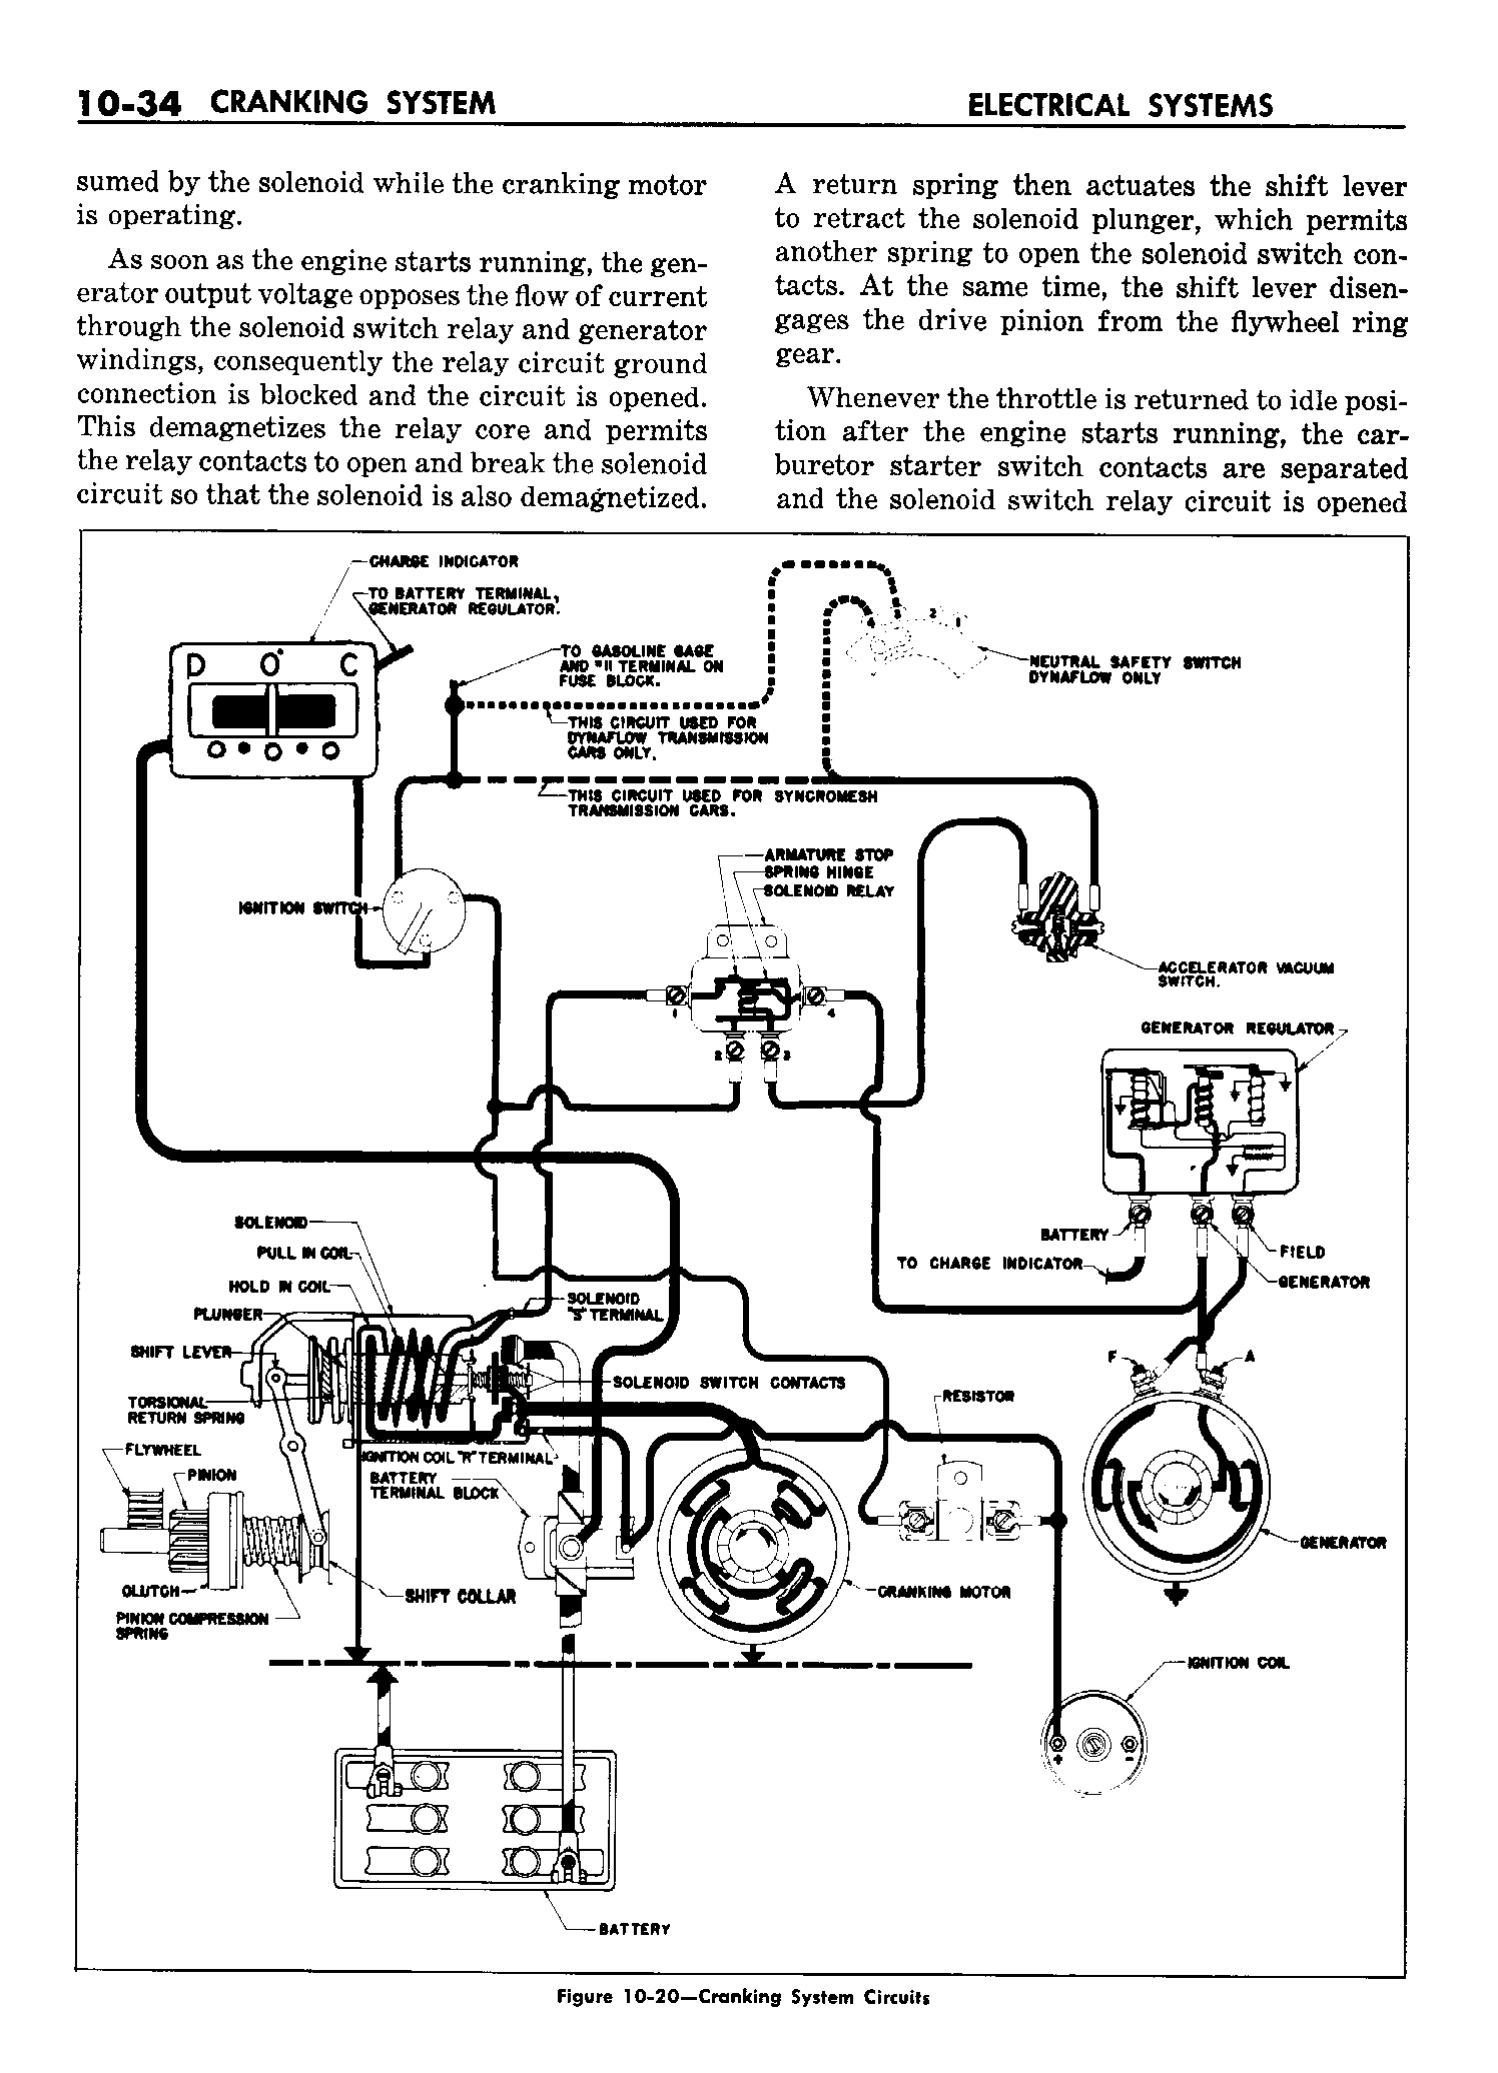 n_11 1958 Buick Shop Manual - Electrical Systems_34.jpg